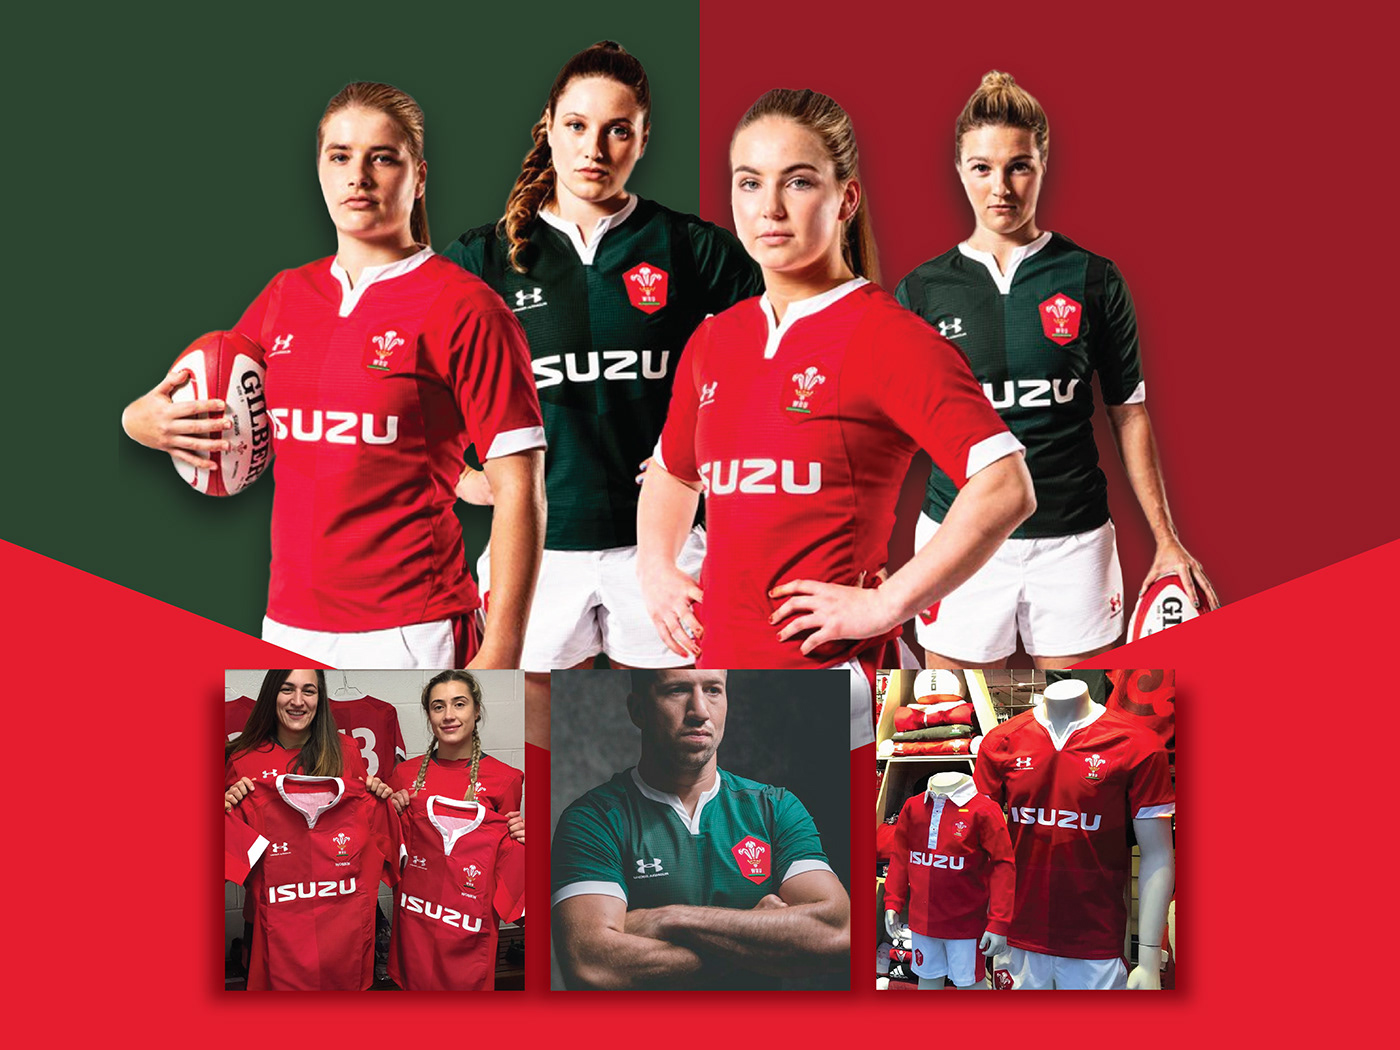 WRU wales rugby Rugby Kit Design Under Armour world cup 2019 RWC rugby world cup uniform Wales Rugby Union